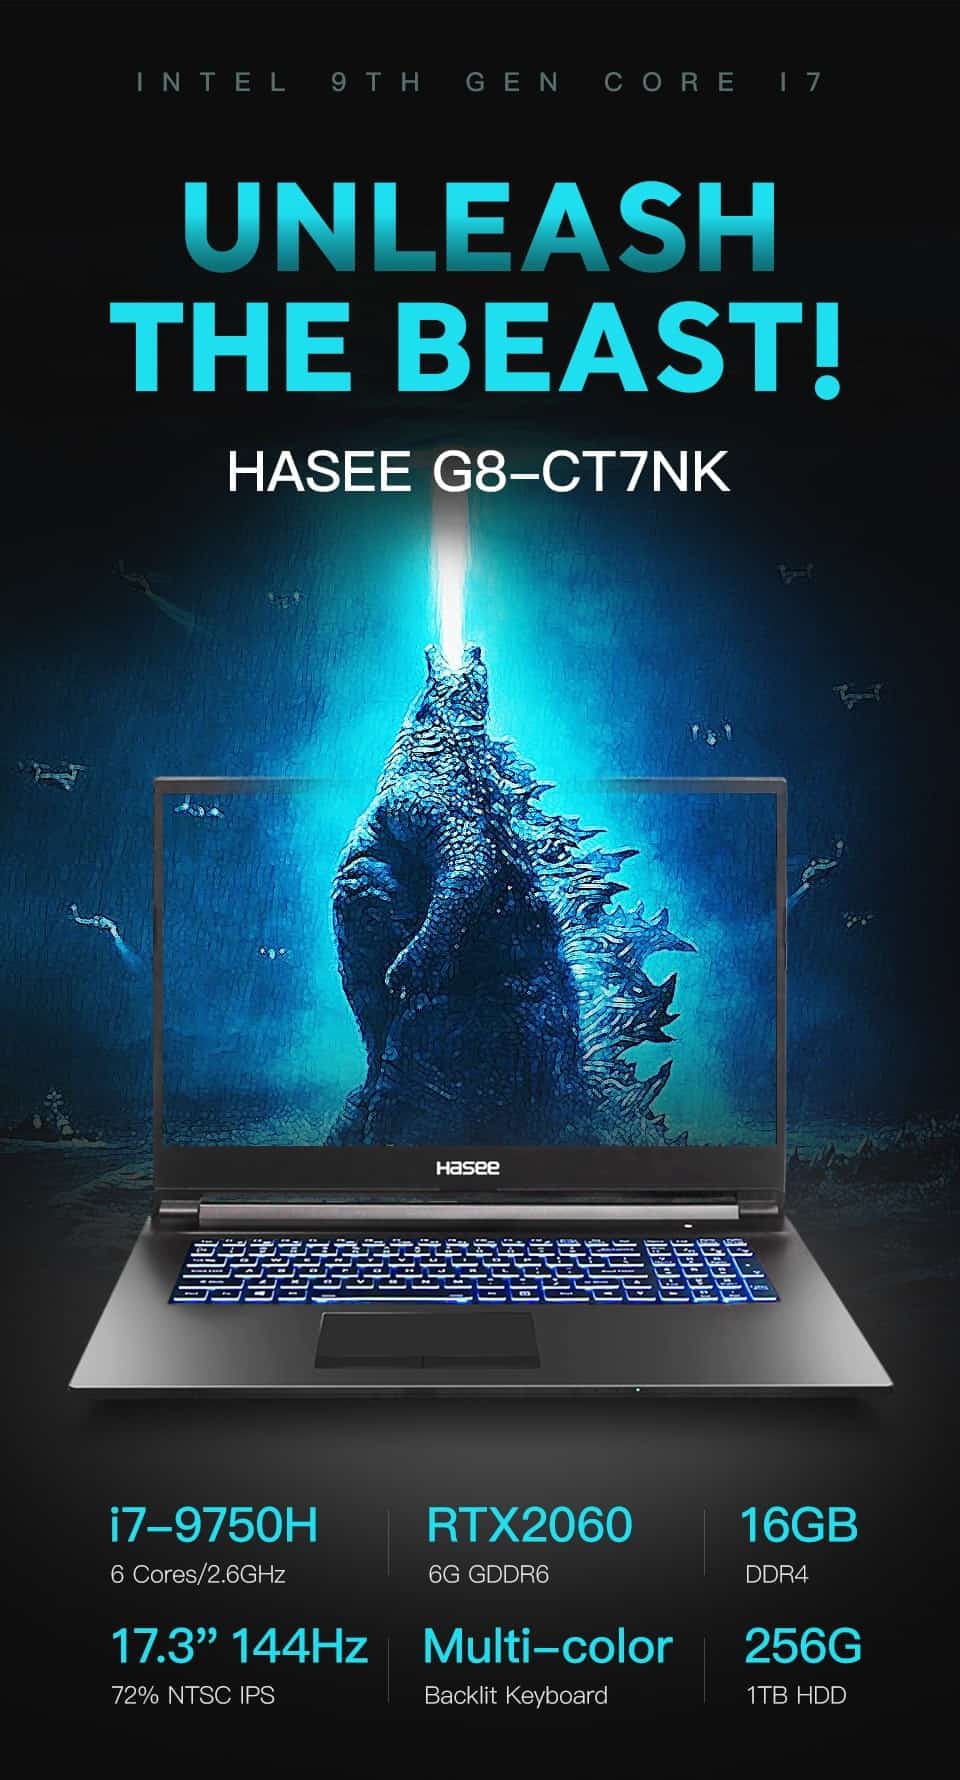 Hasee Notbook Hasee G8-CT7NK Laptop for Gaming (Intel Core I7 16GB RAM/256G SSD) 